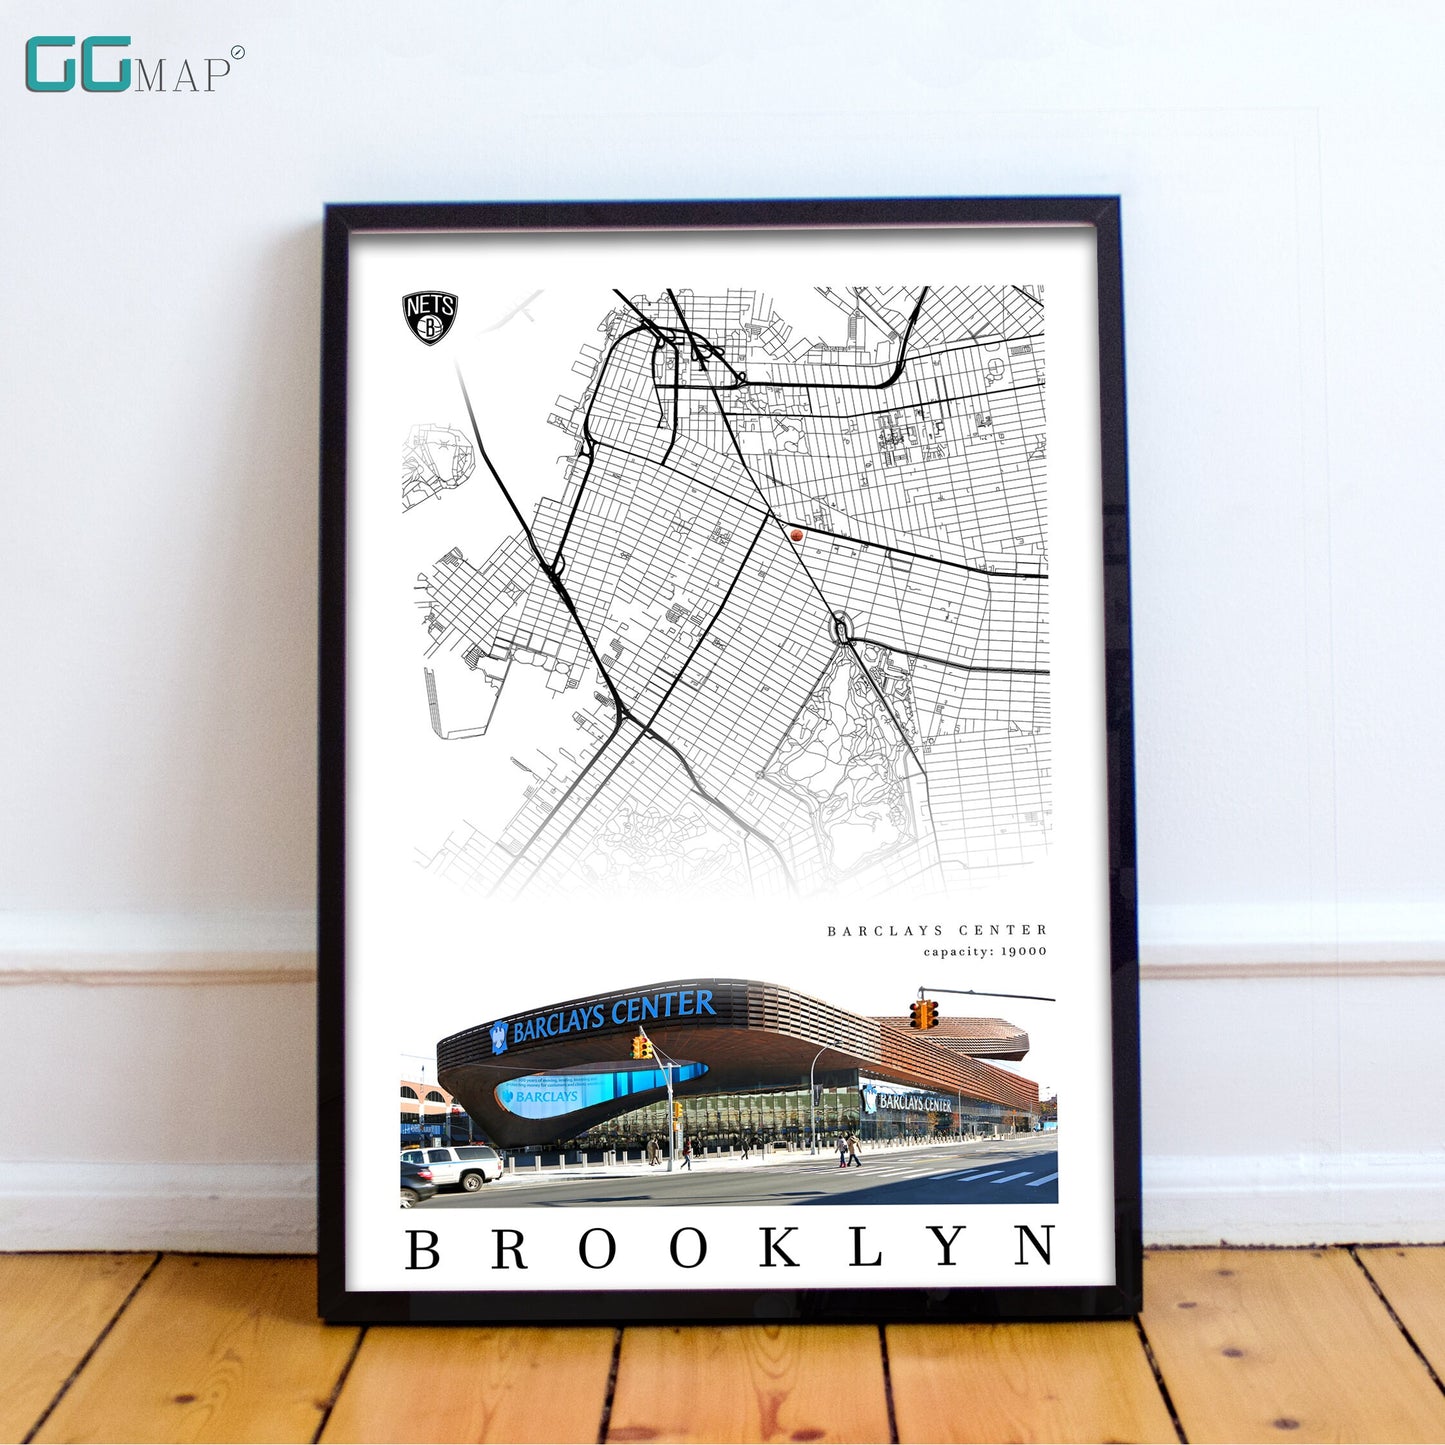 City map of BROOKLYN - Barclays Center - Home Decor Brooklyn - Barclays Center wall decor - Brooklyn poster - Print map